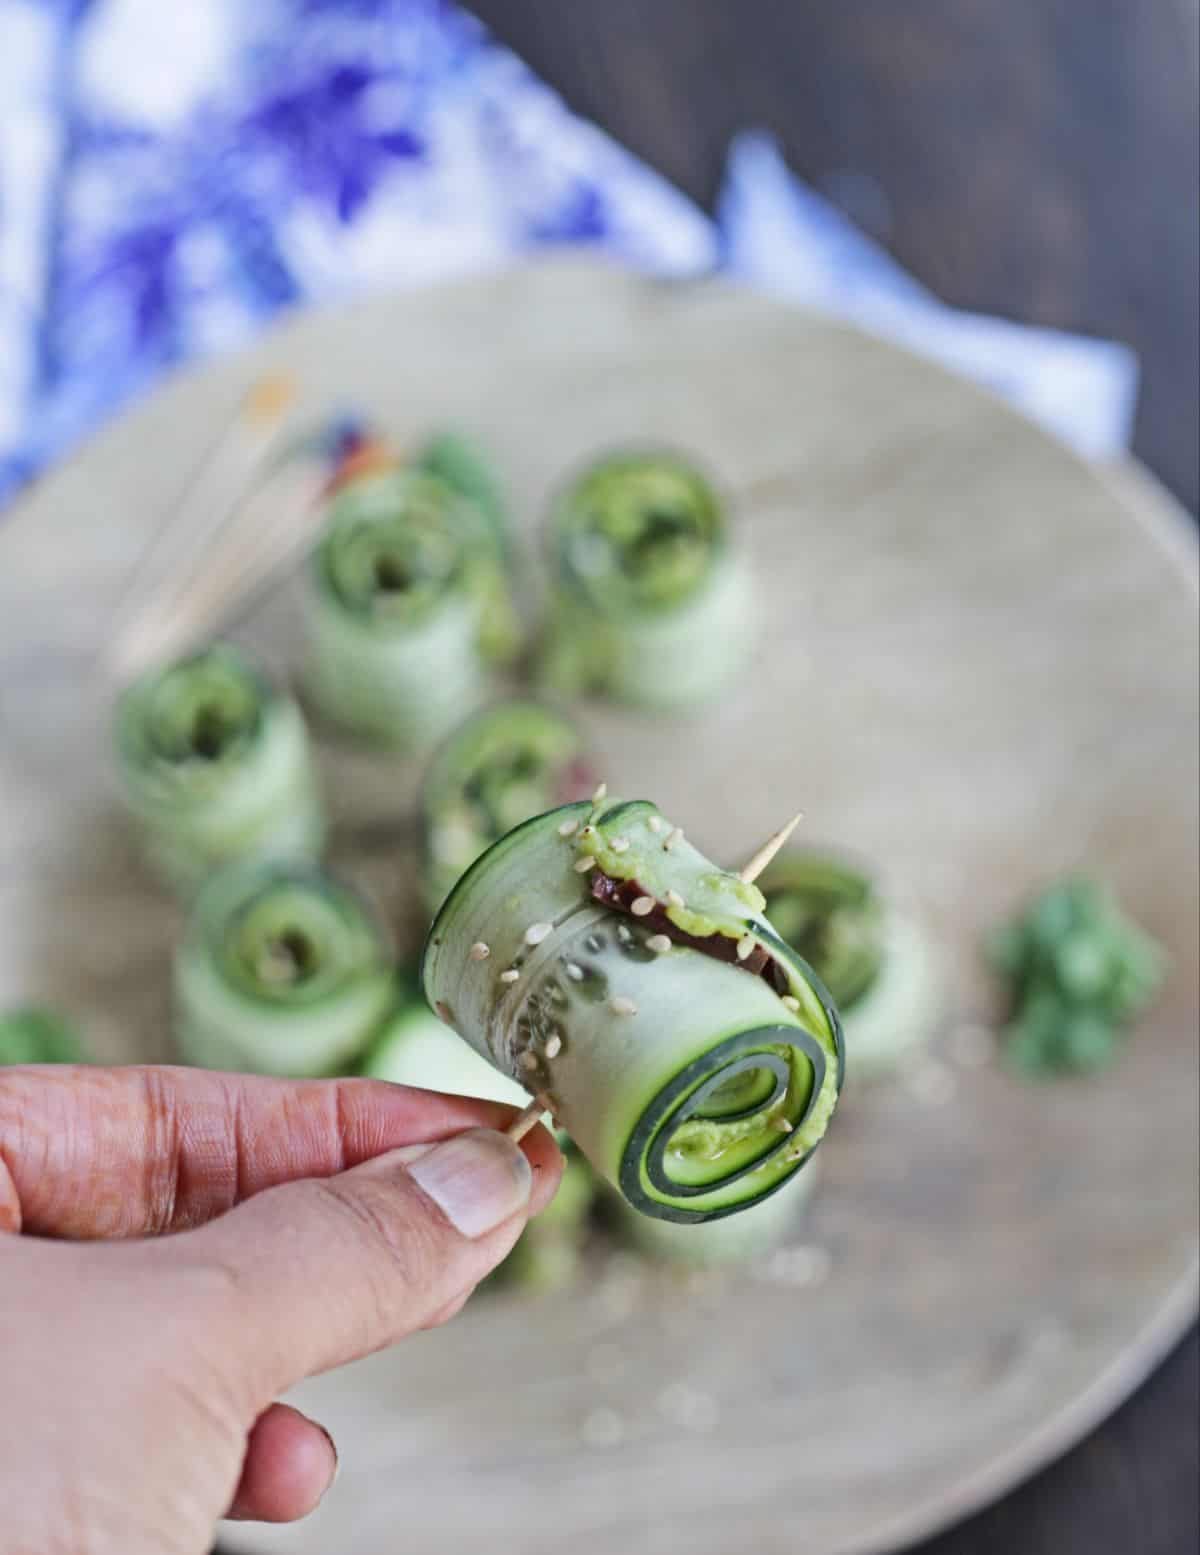 One single cucumber roll held in hand with a toothpick